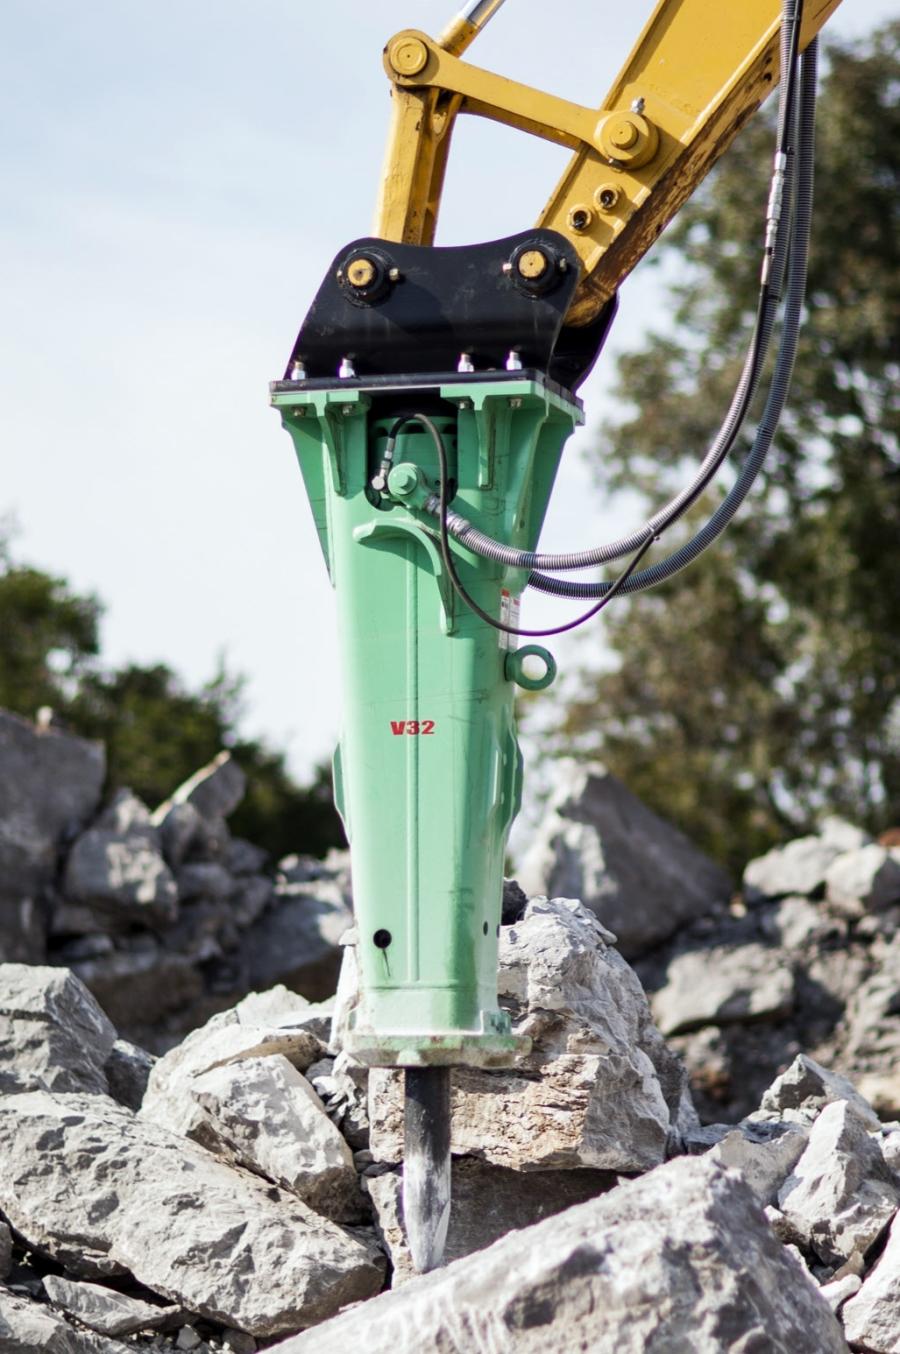 The 3,408-pound hydraulic breaker offers 15 speed variations, delivering between 400 and 1,050 blows per minute.